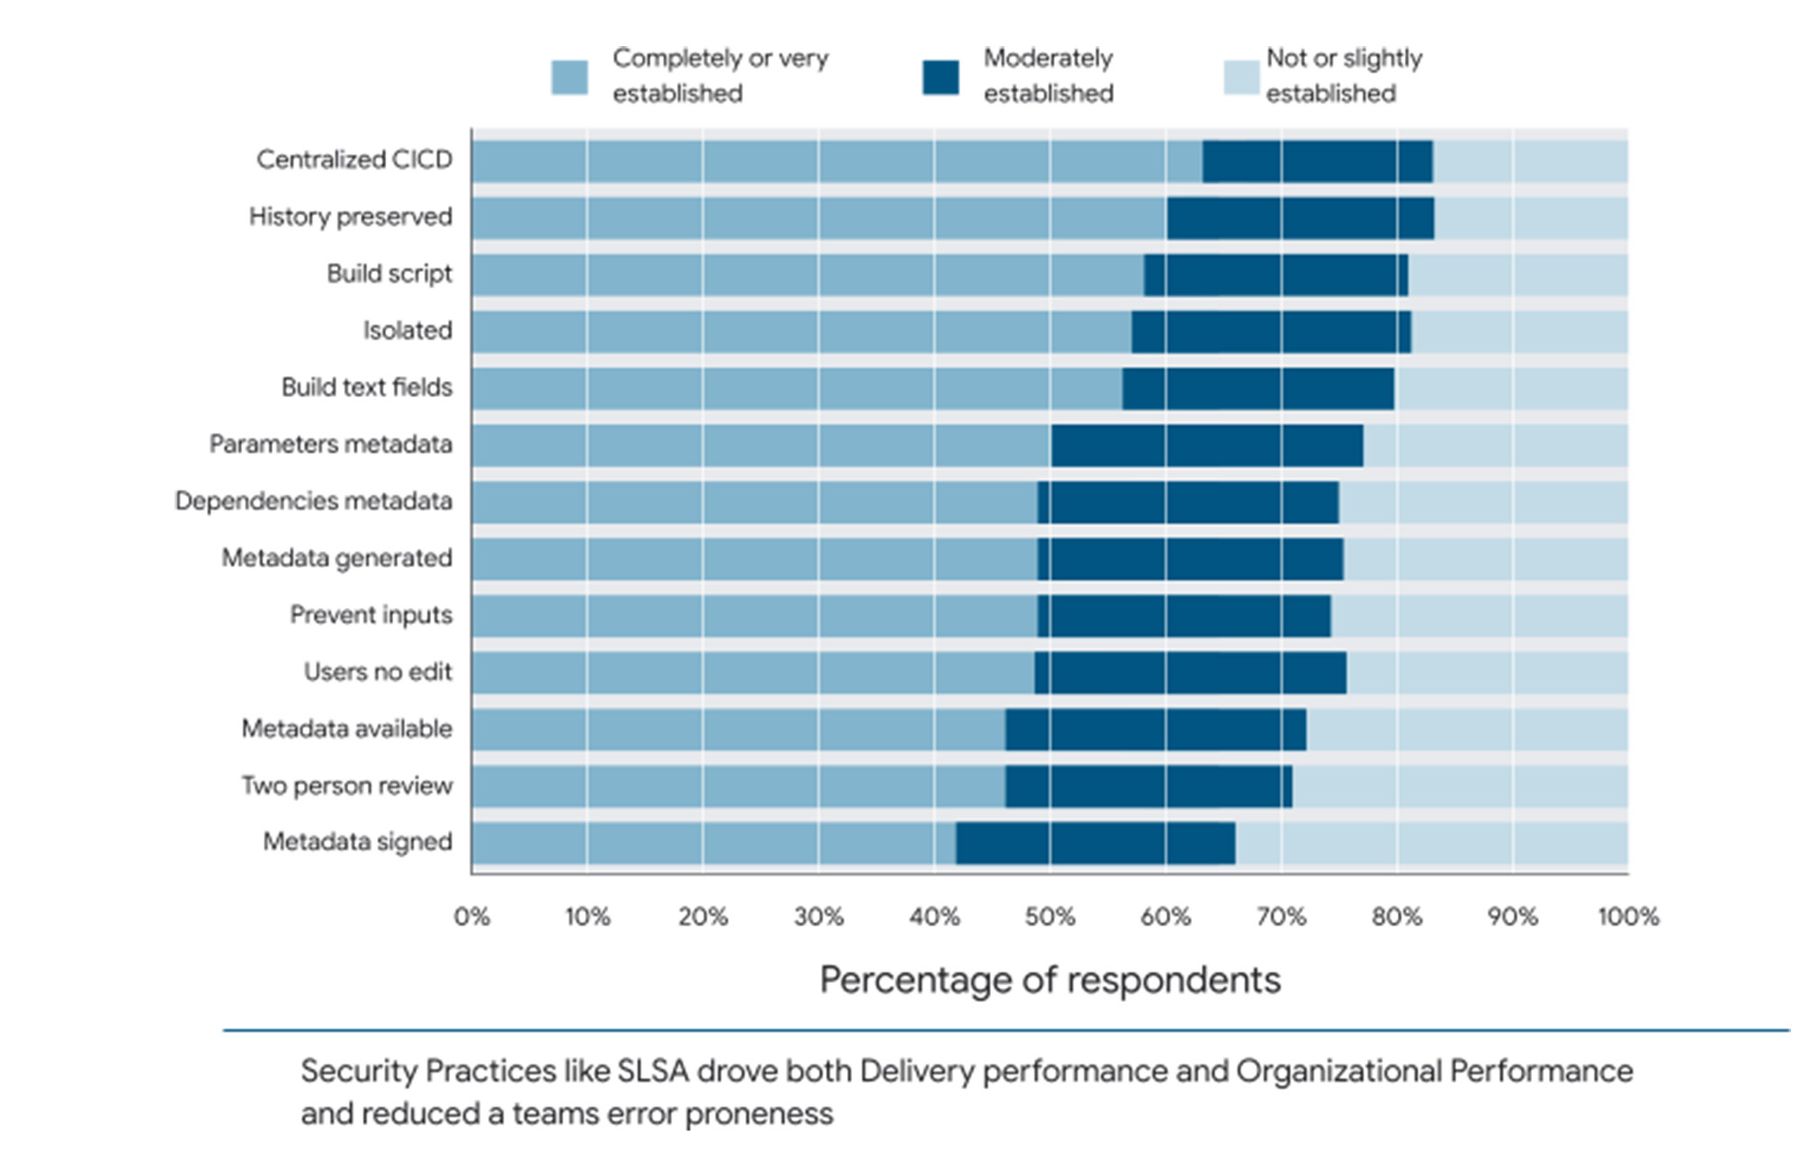 Respondents' statements around implementation of supply-chain security practices